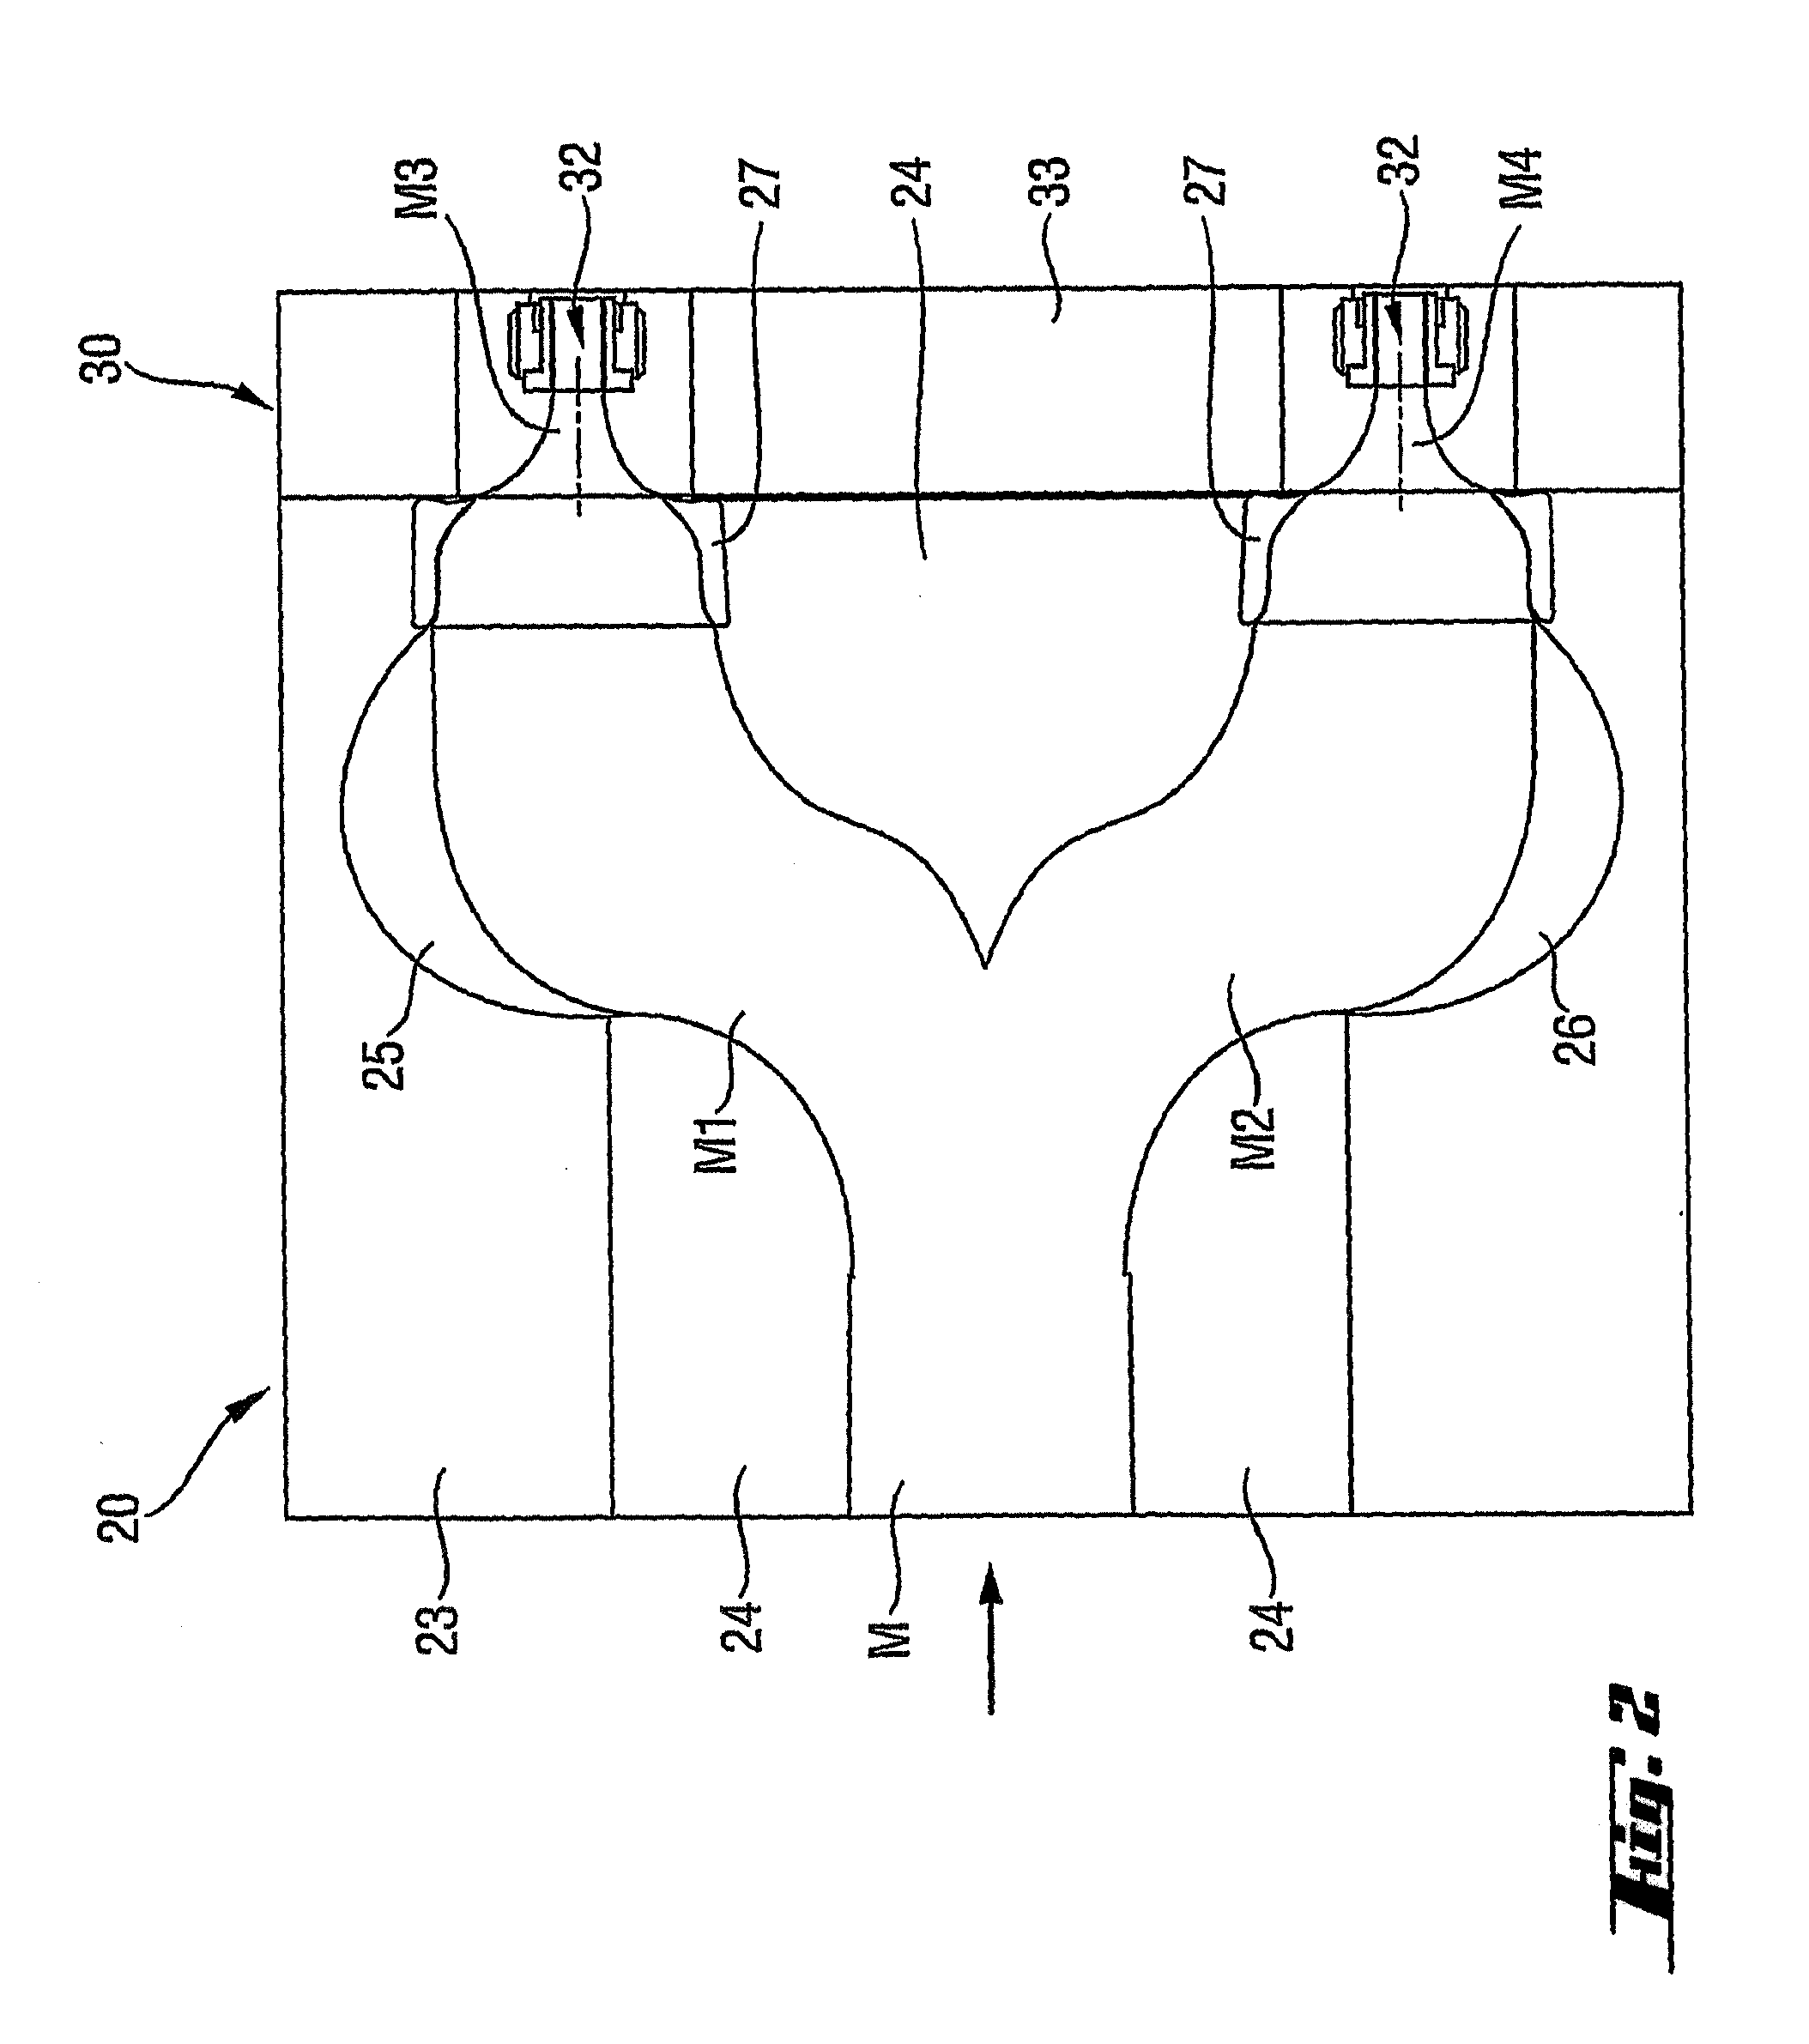 Device and method for the extrusion of viscoelastic materials